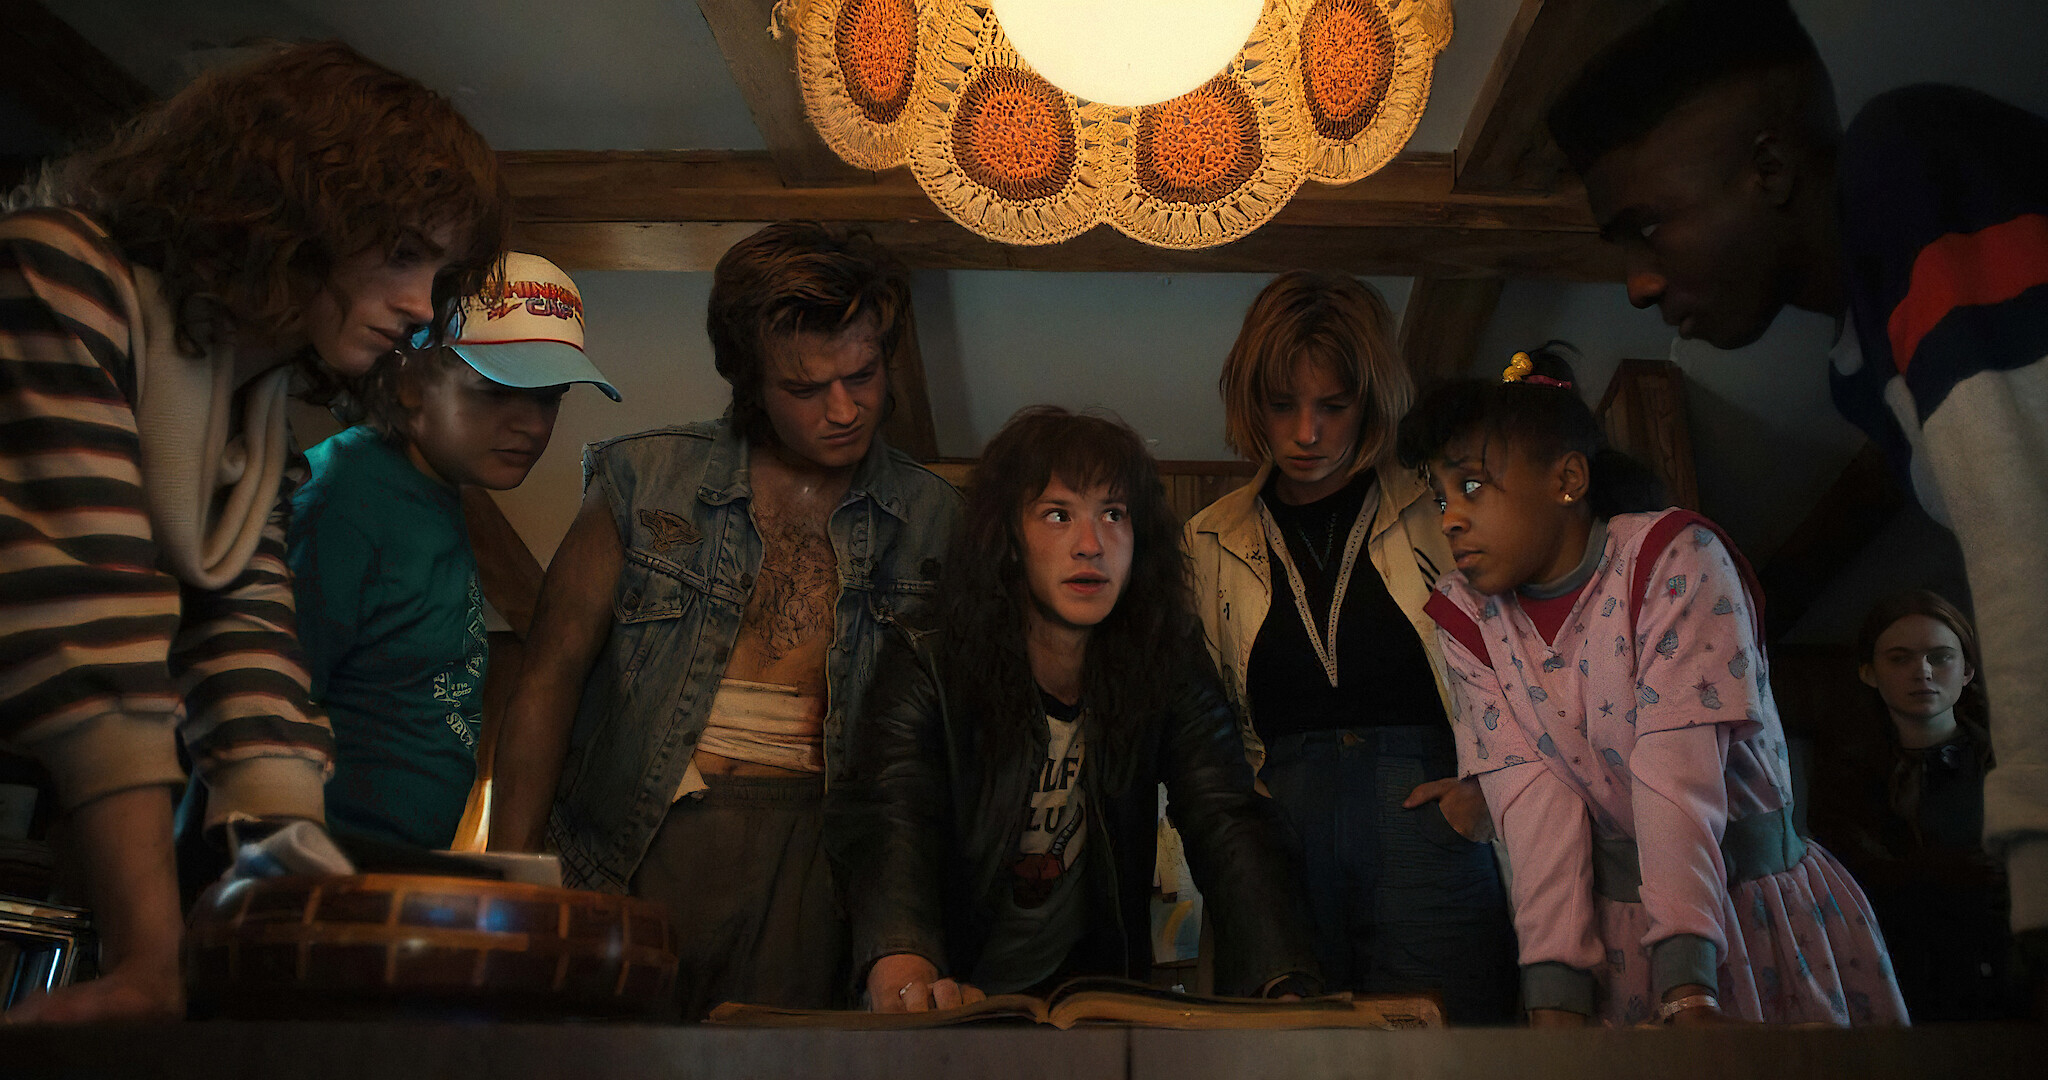 Watch The Chilling Trailer For Volume 2 Of 'Stranger Things